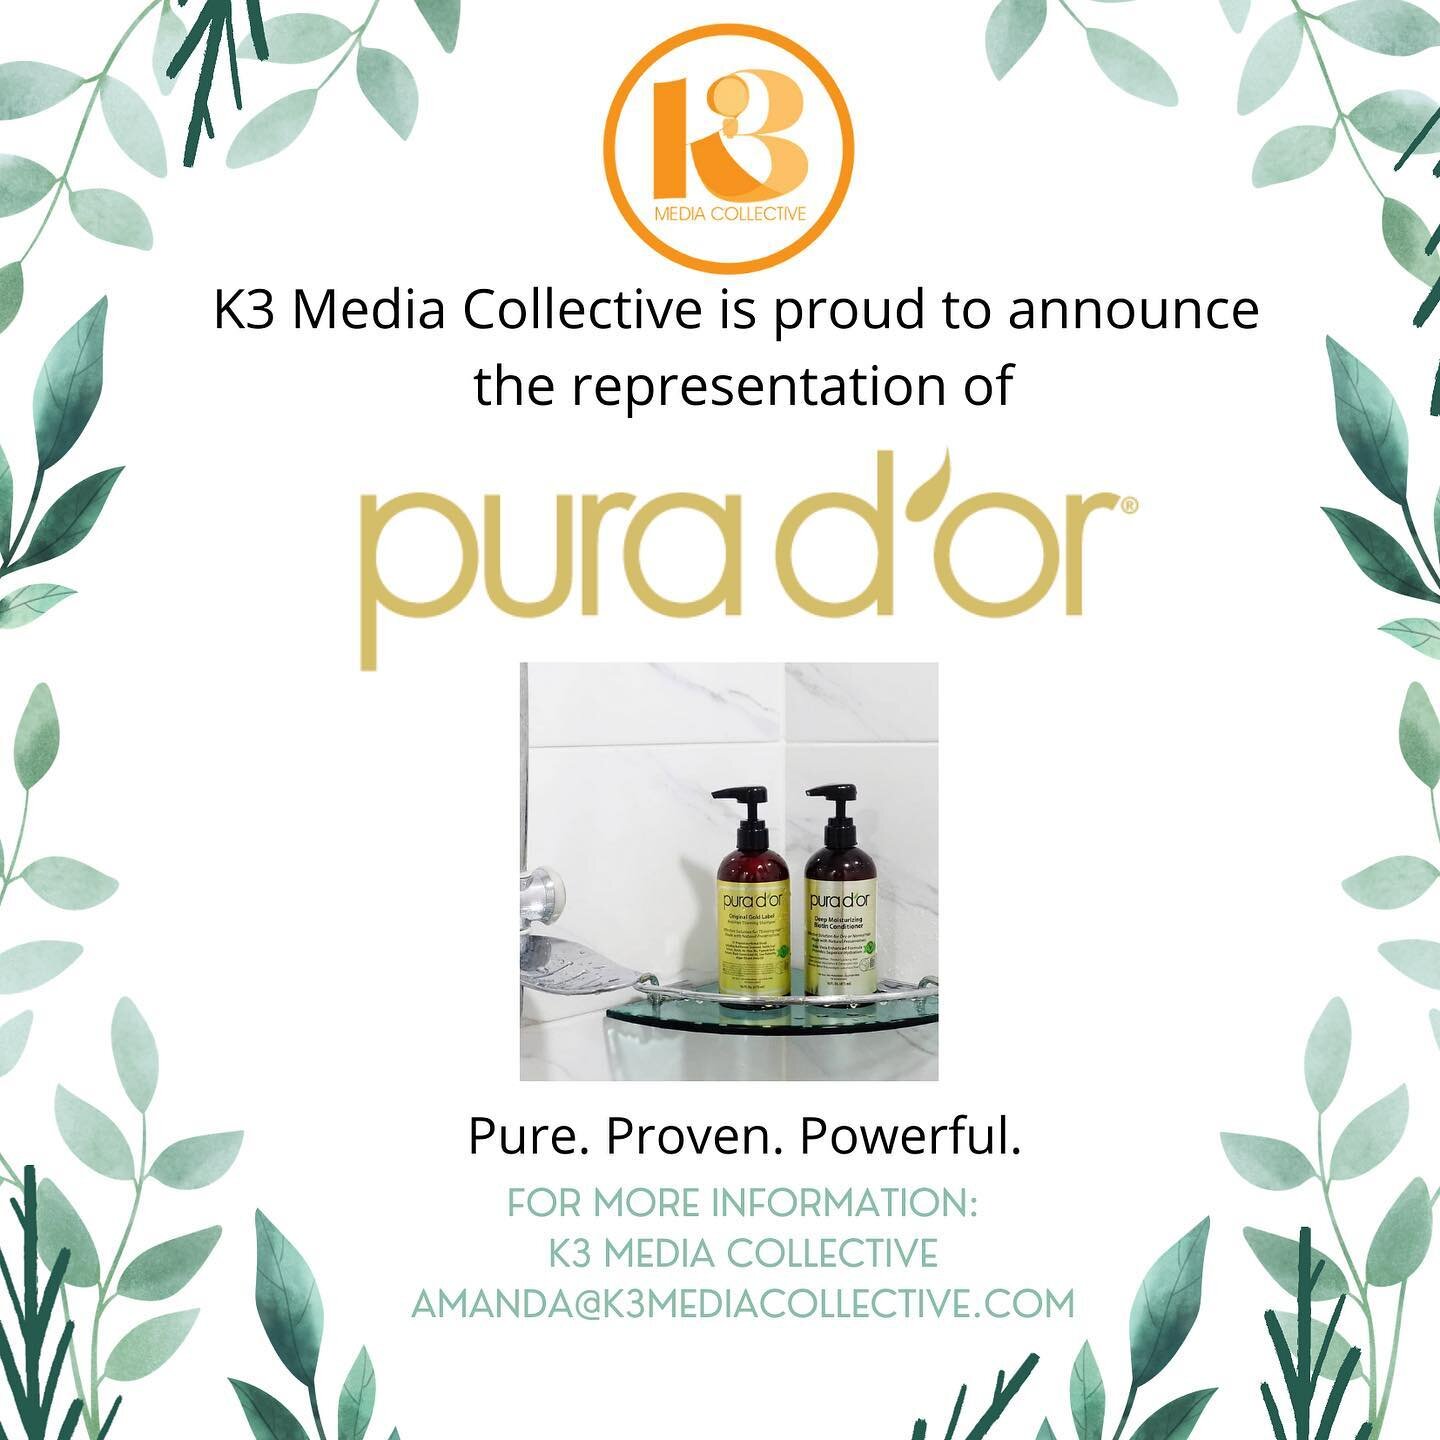 Did you hear the news? Hey Instagram, meet our newest client: @pura_dor 🌿